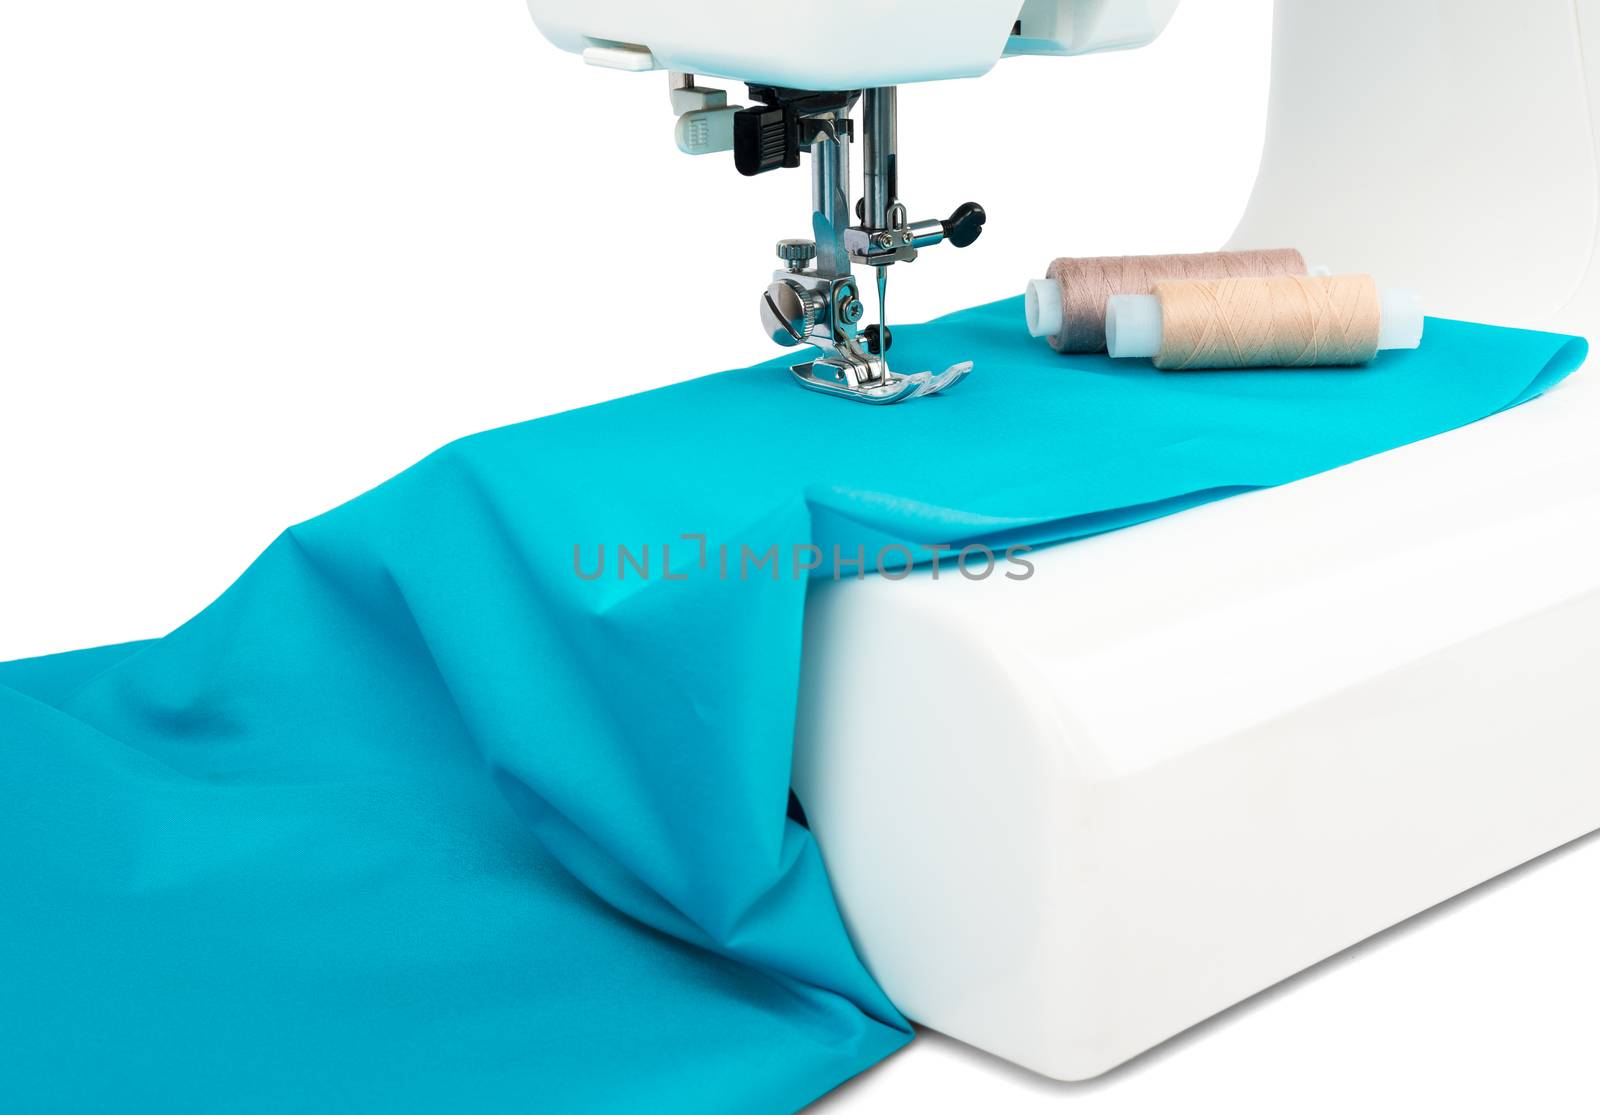 Electric sewing machine with blue cloth and spools of thread. Close-up